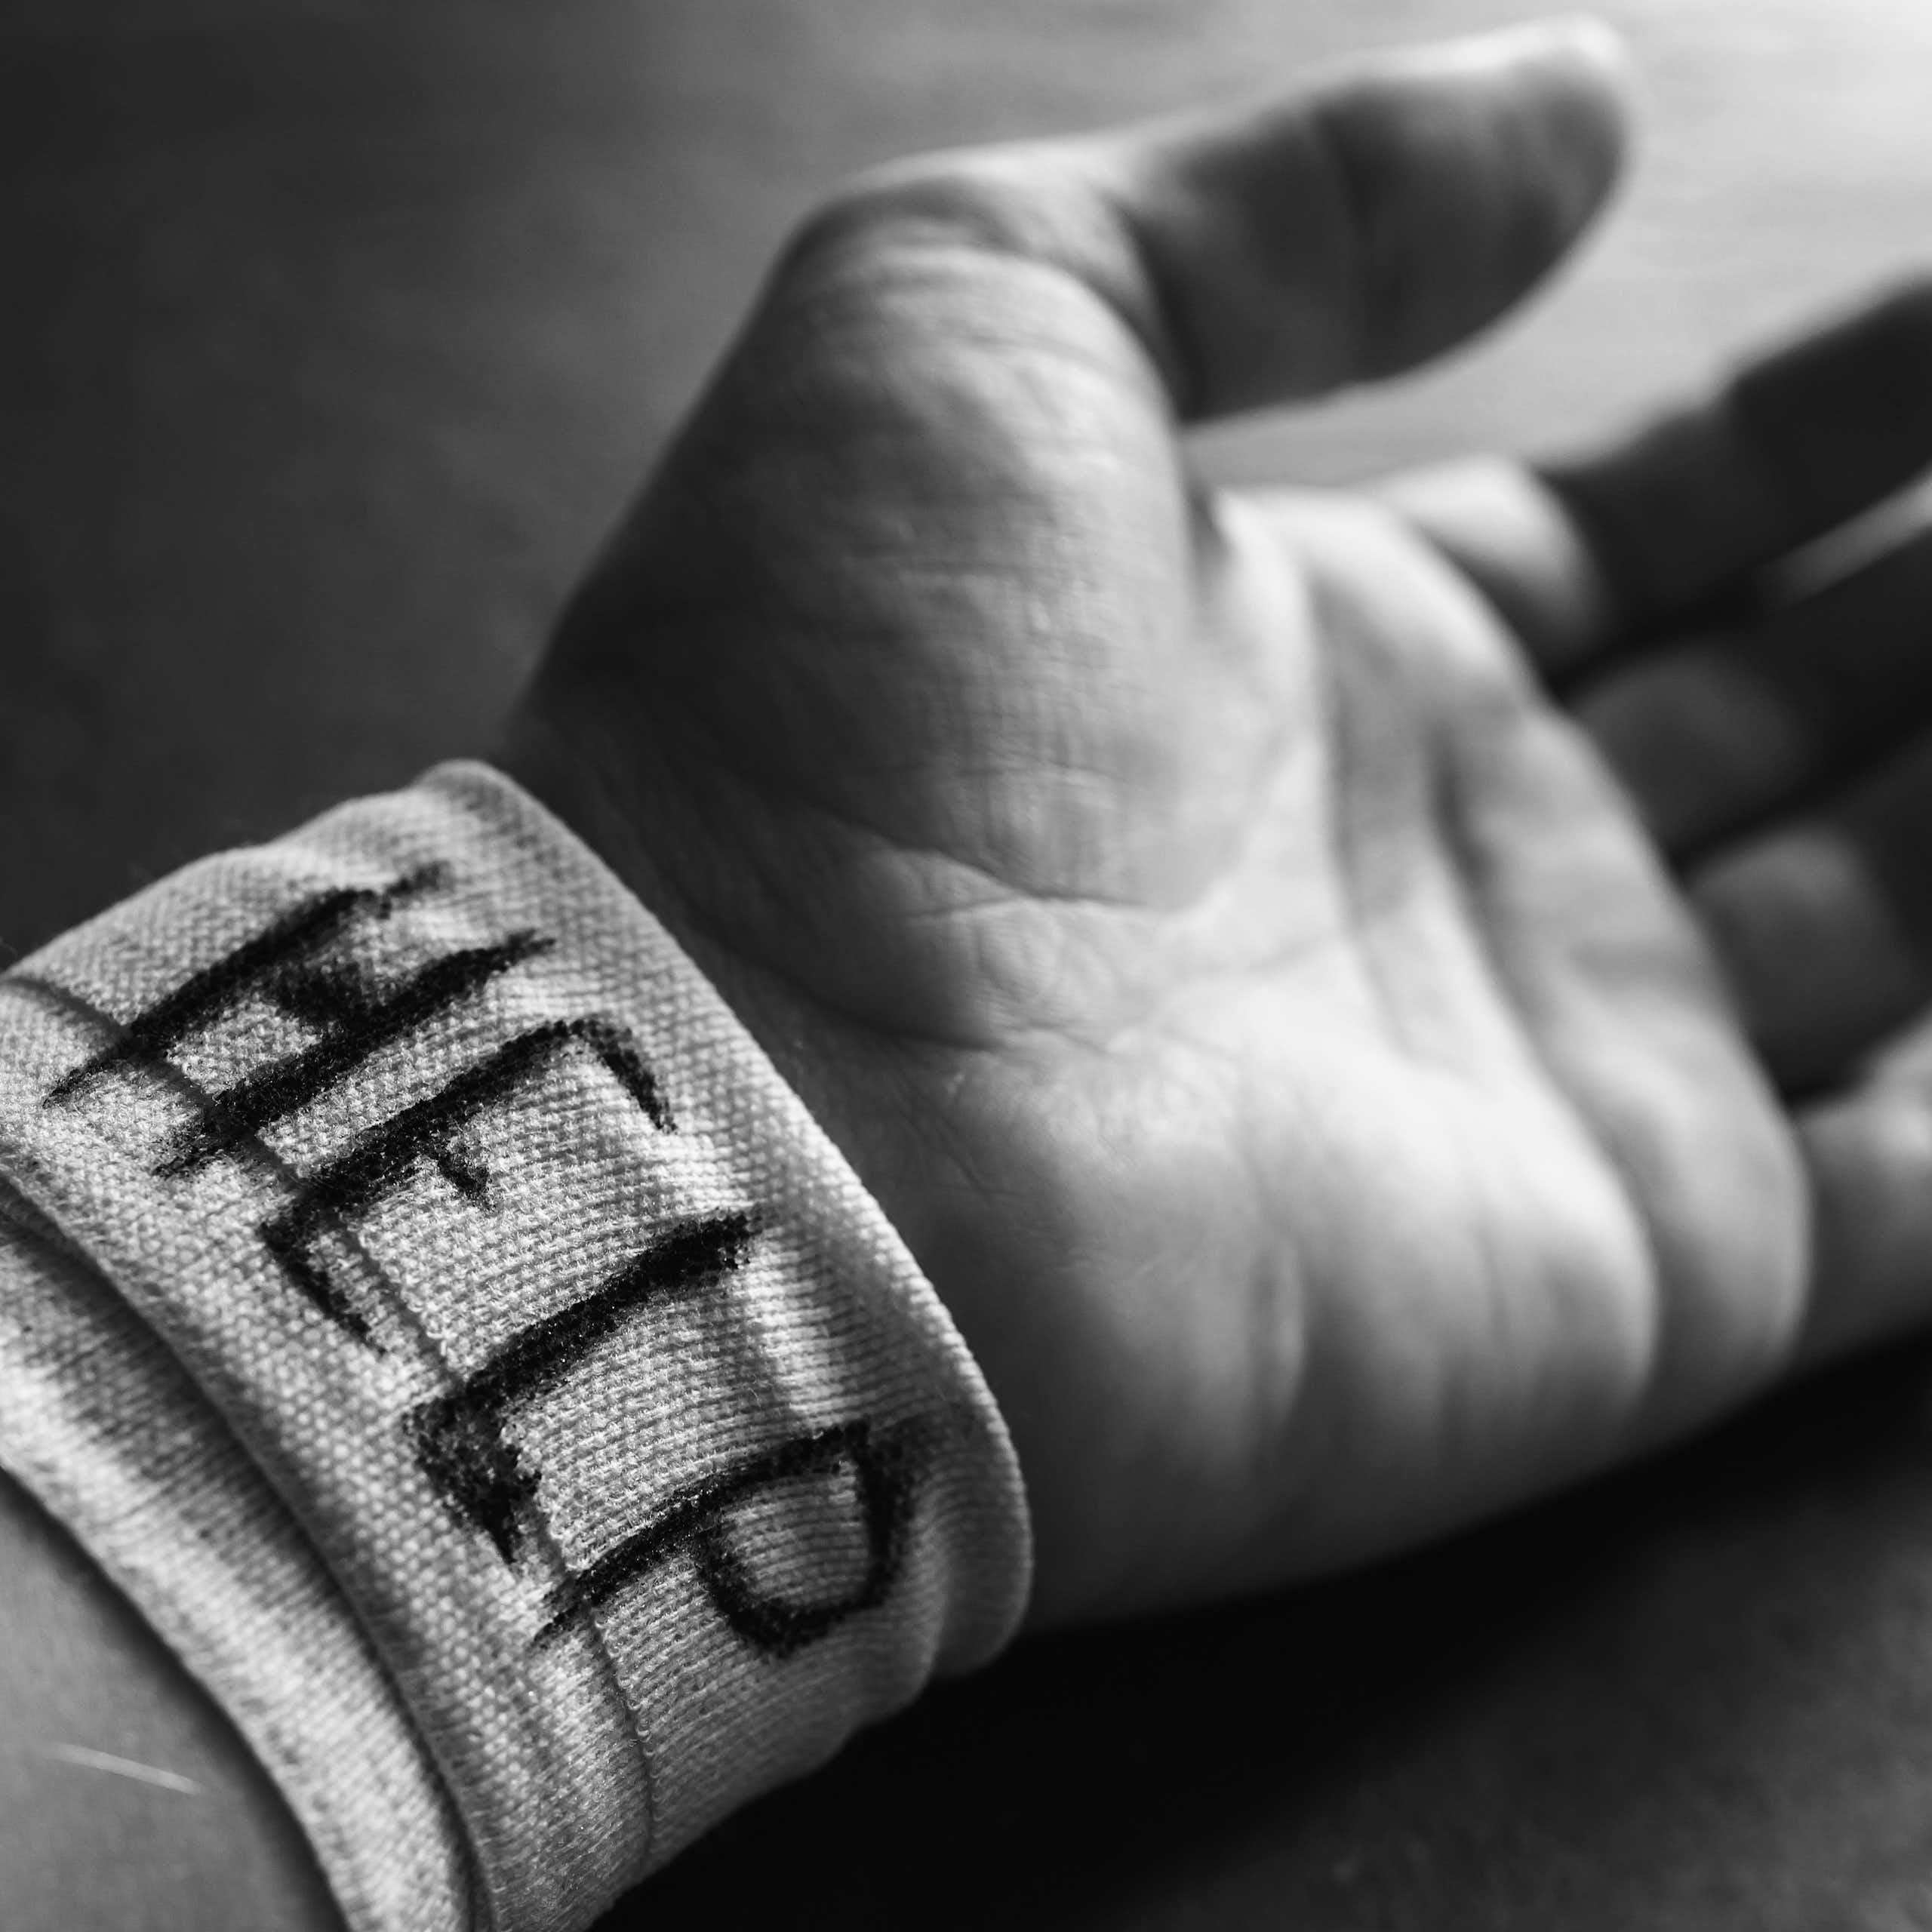 A hand with 'HELP' written on its bandaged wrist